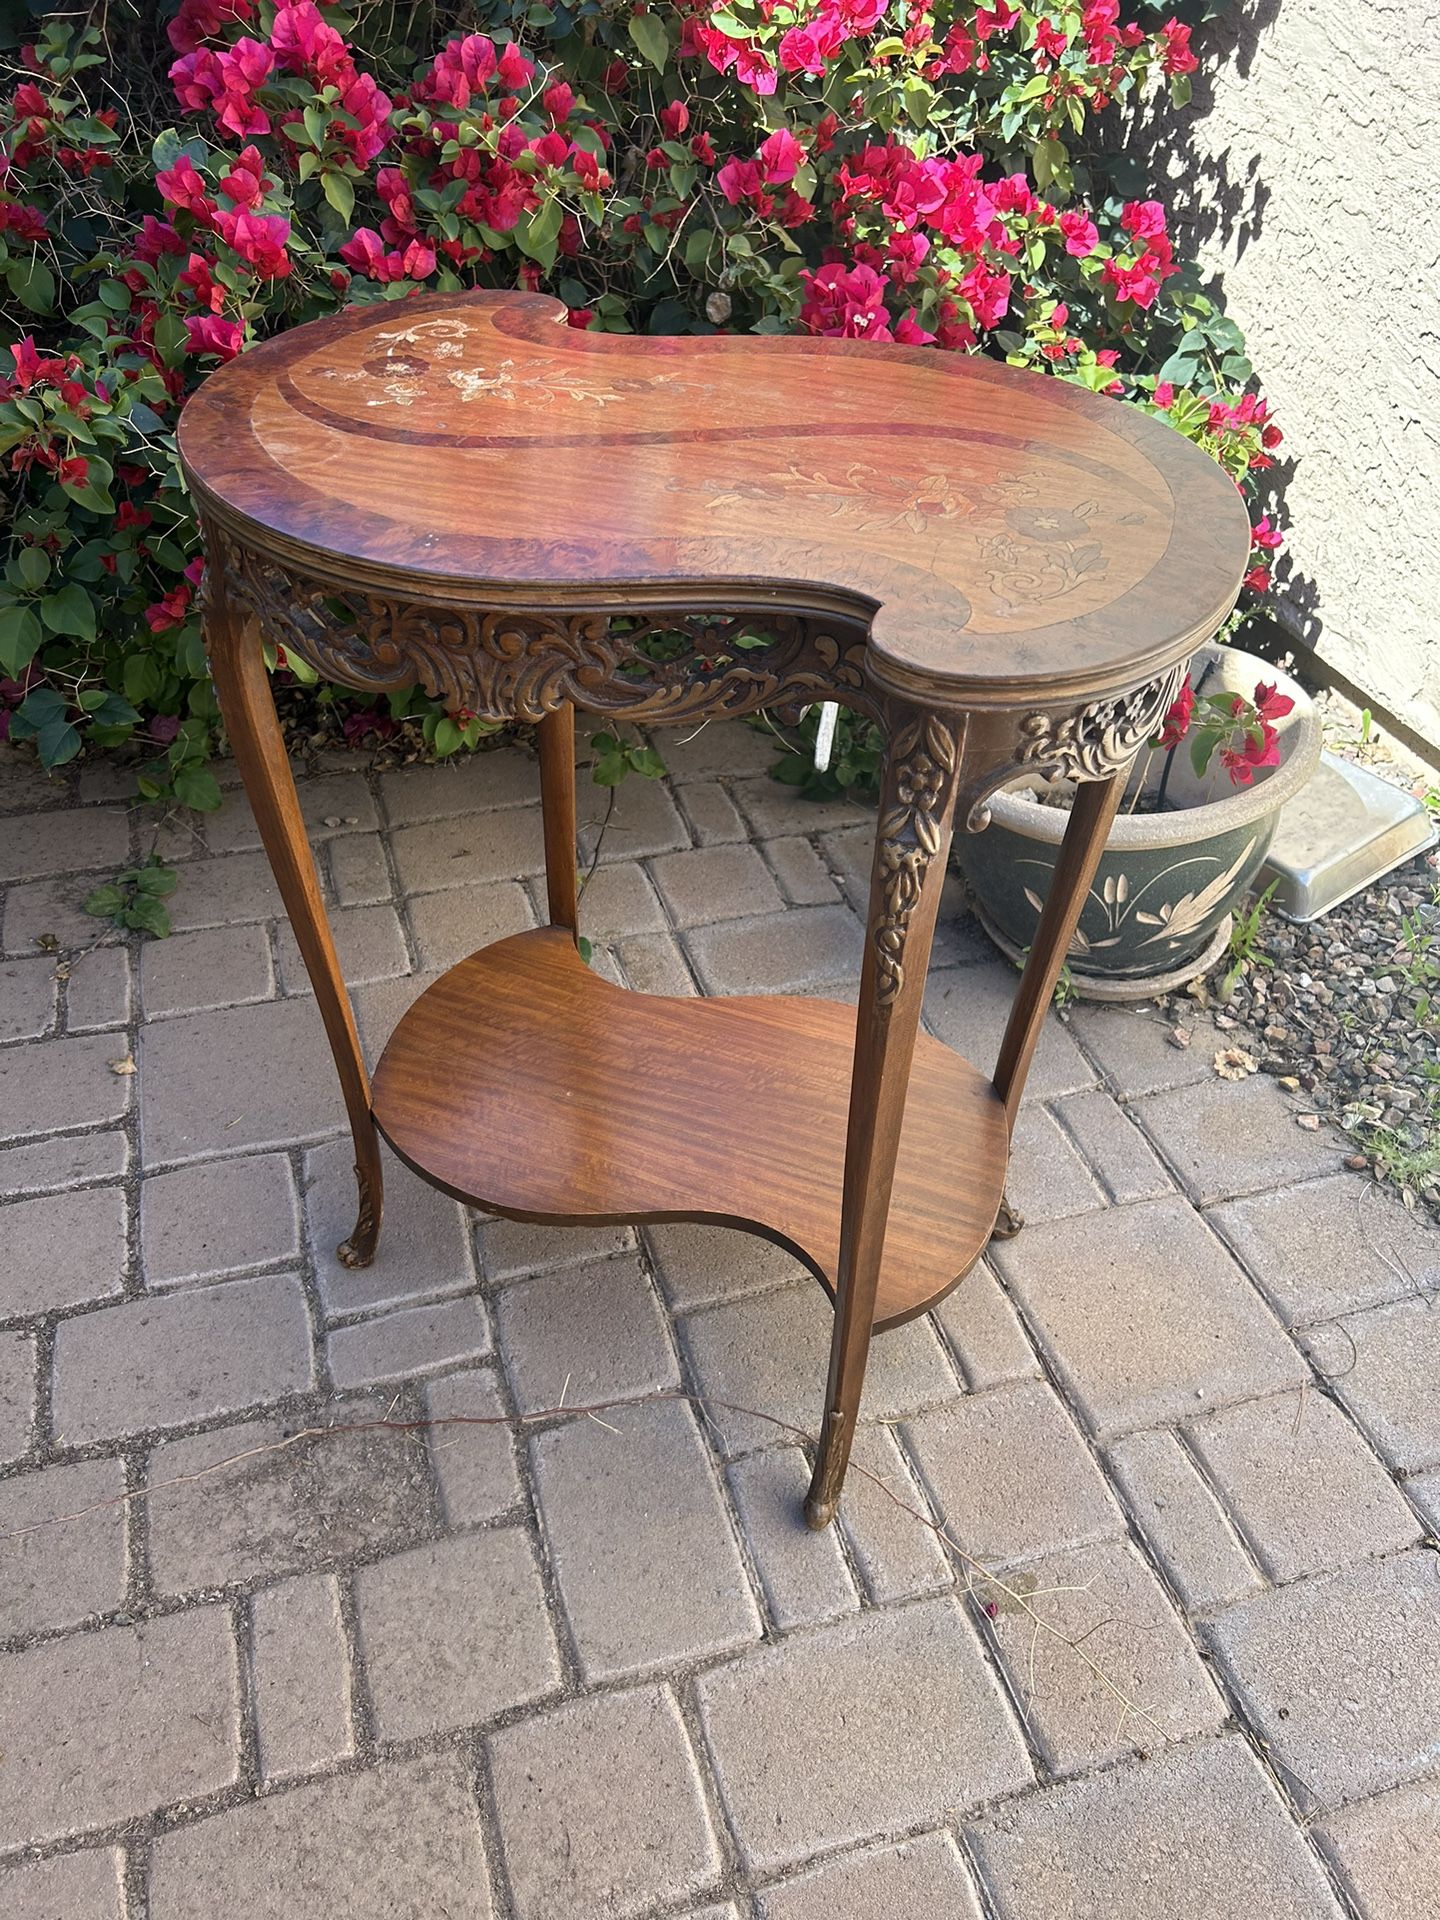 Victorian Tables!